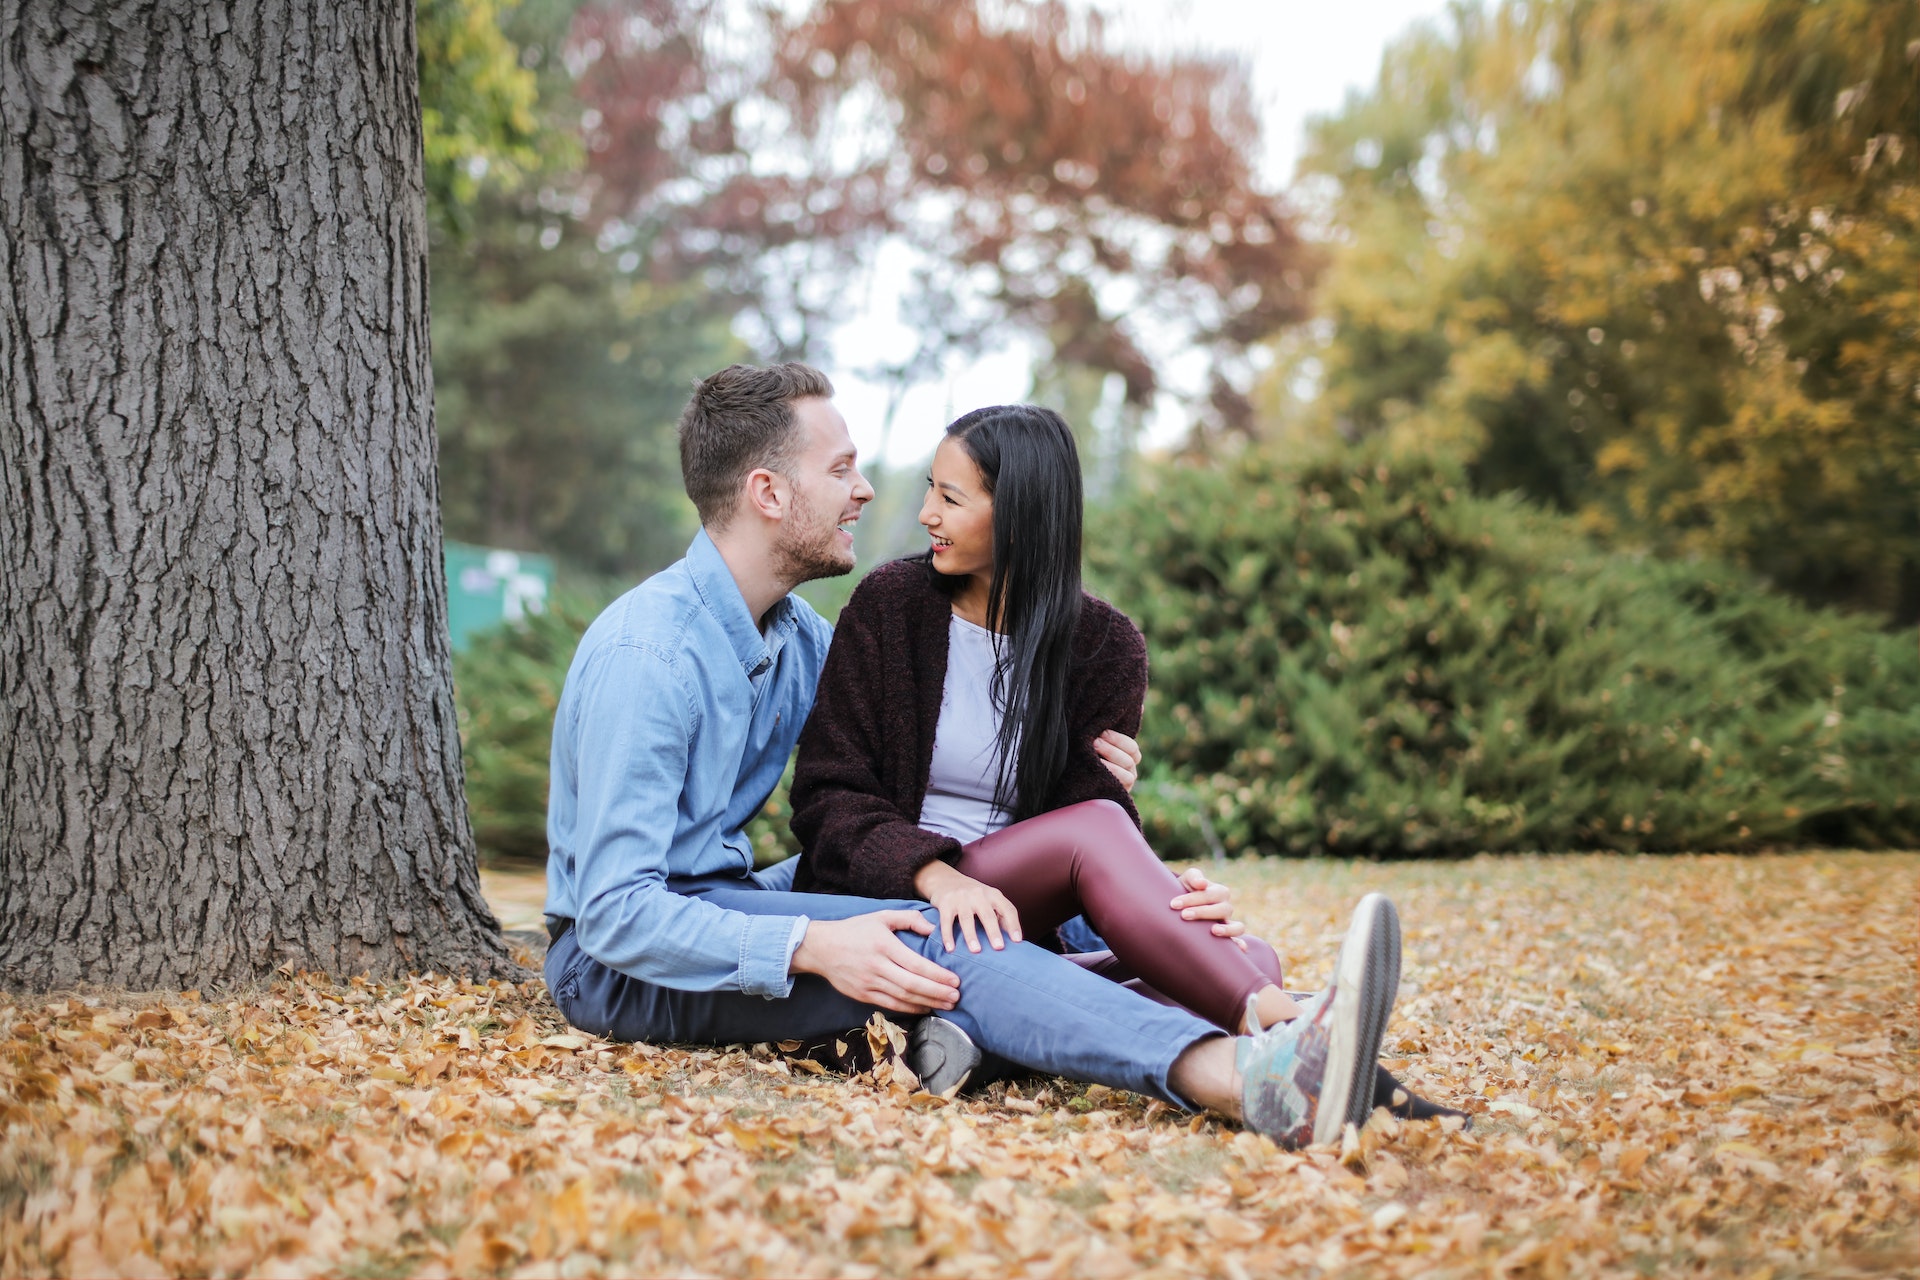 A couple sitting under a tree | Source: Pexels